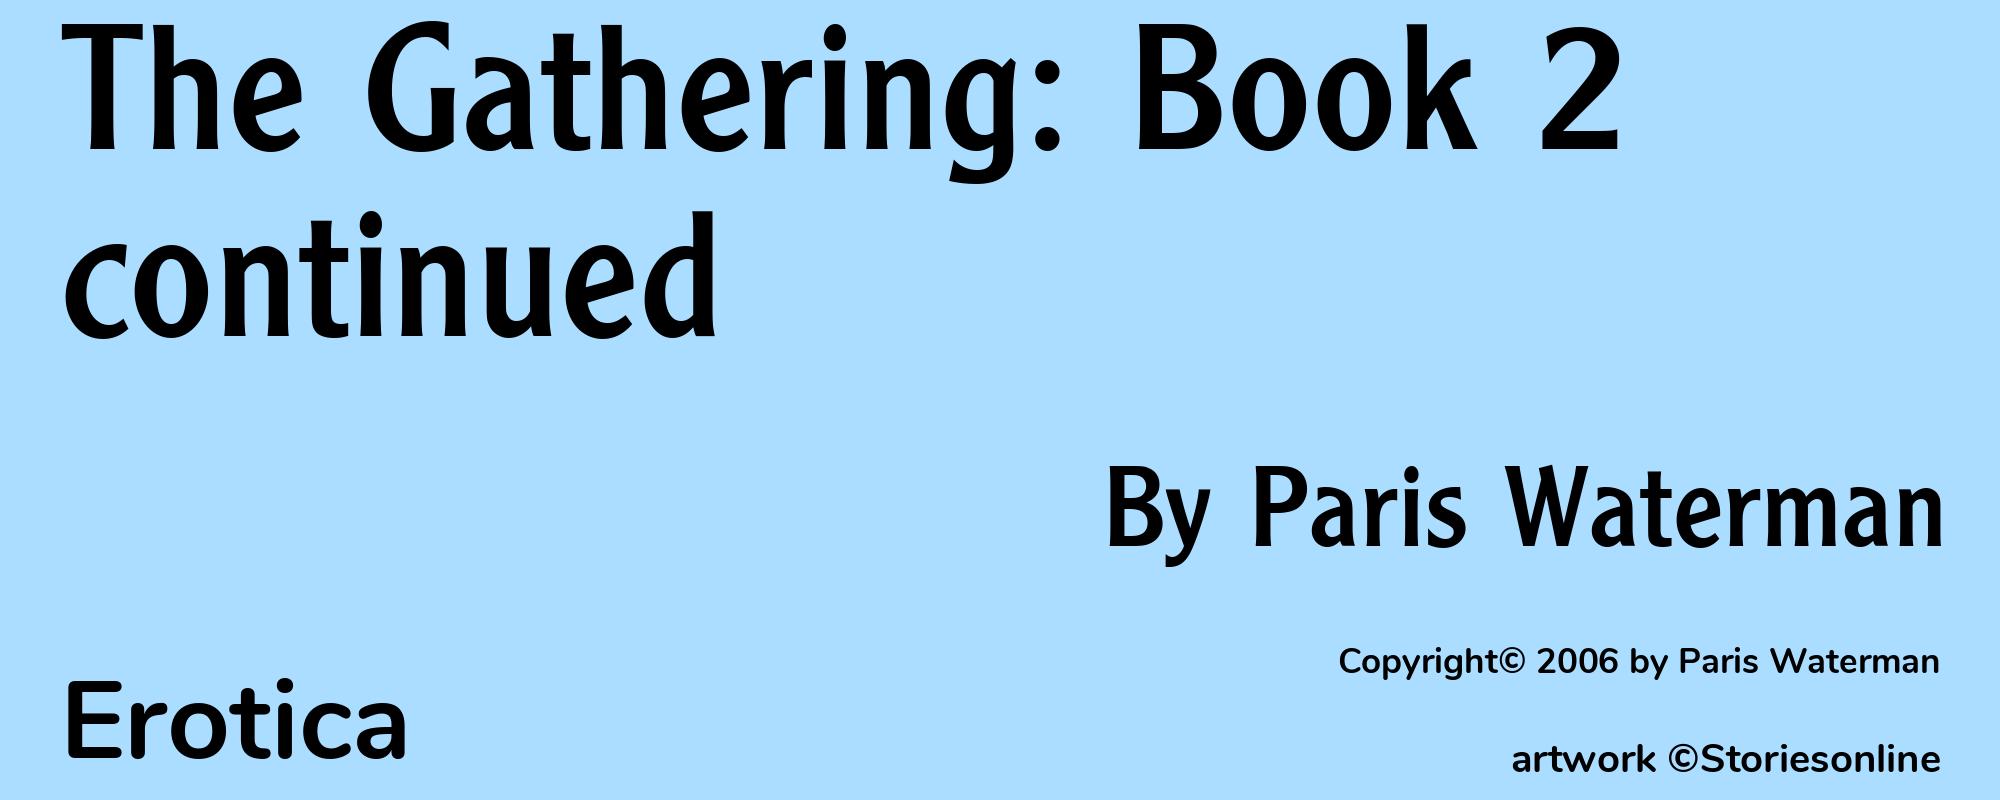 The Gathering: Book 2 continued - Cover